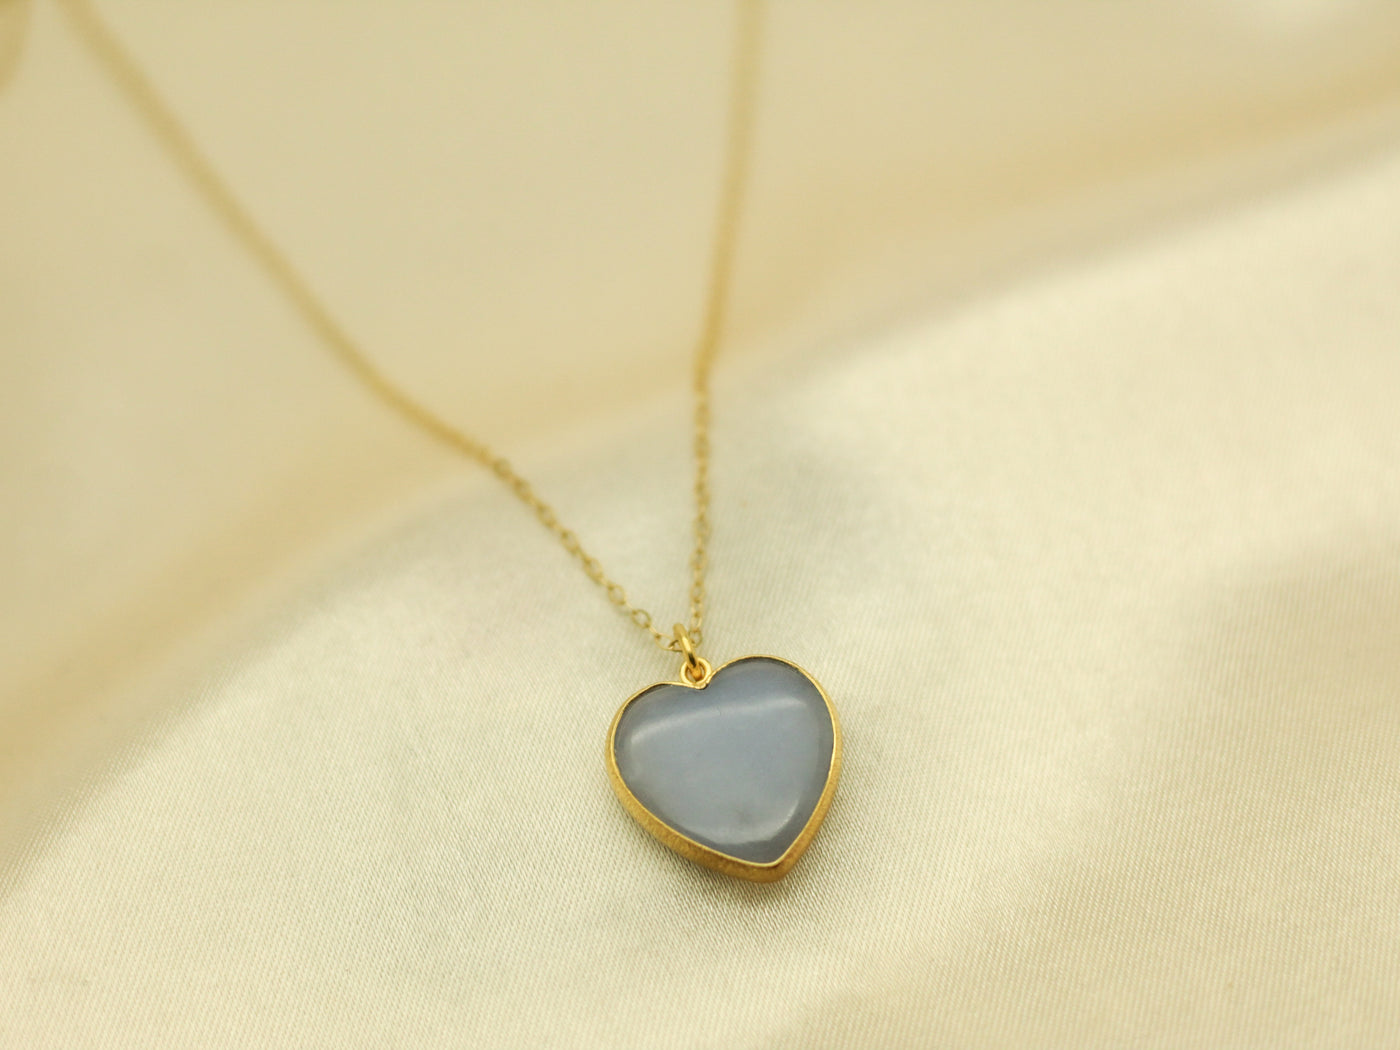 Aime heart necklace hand carved stone